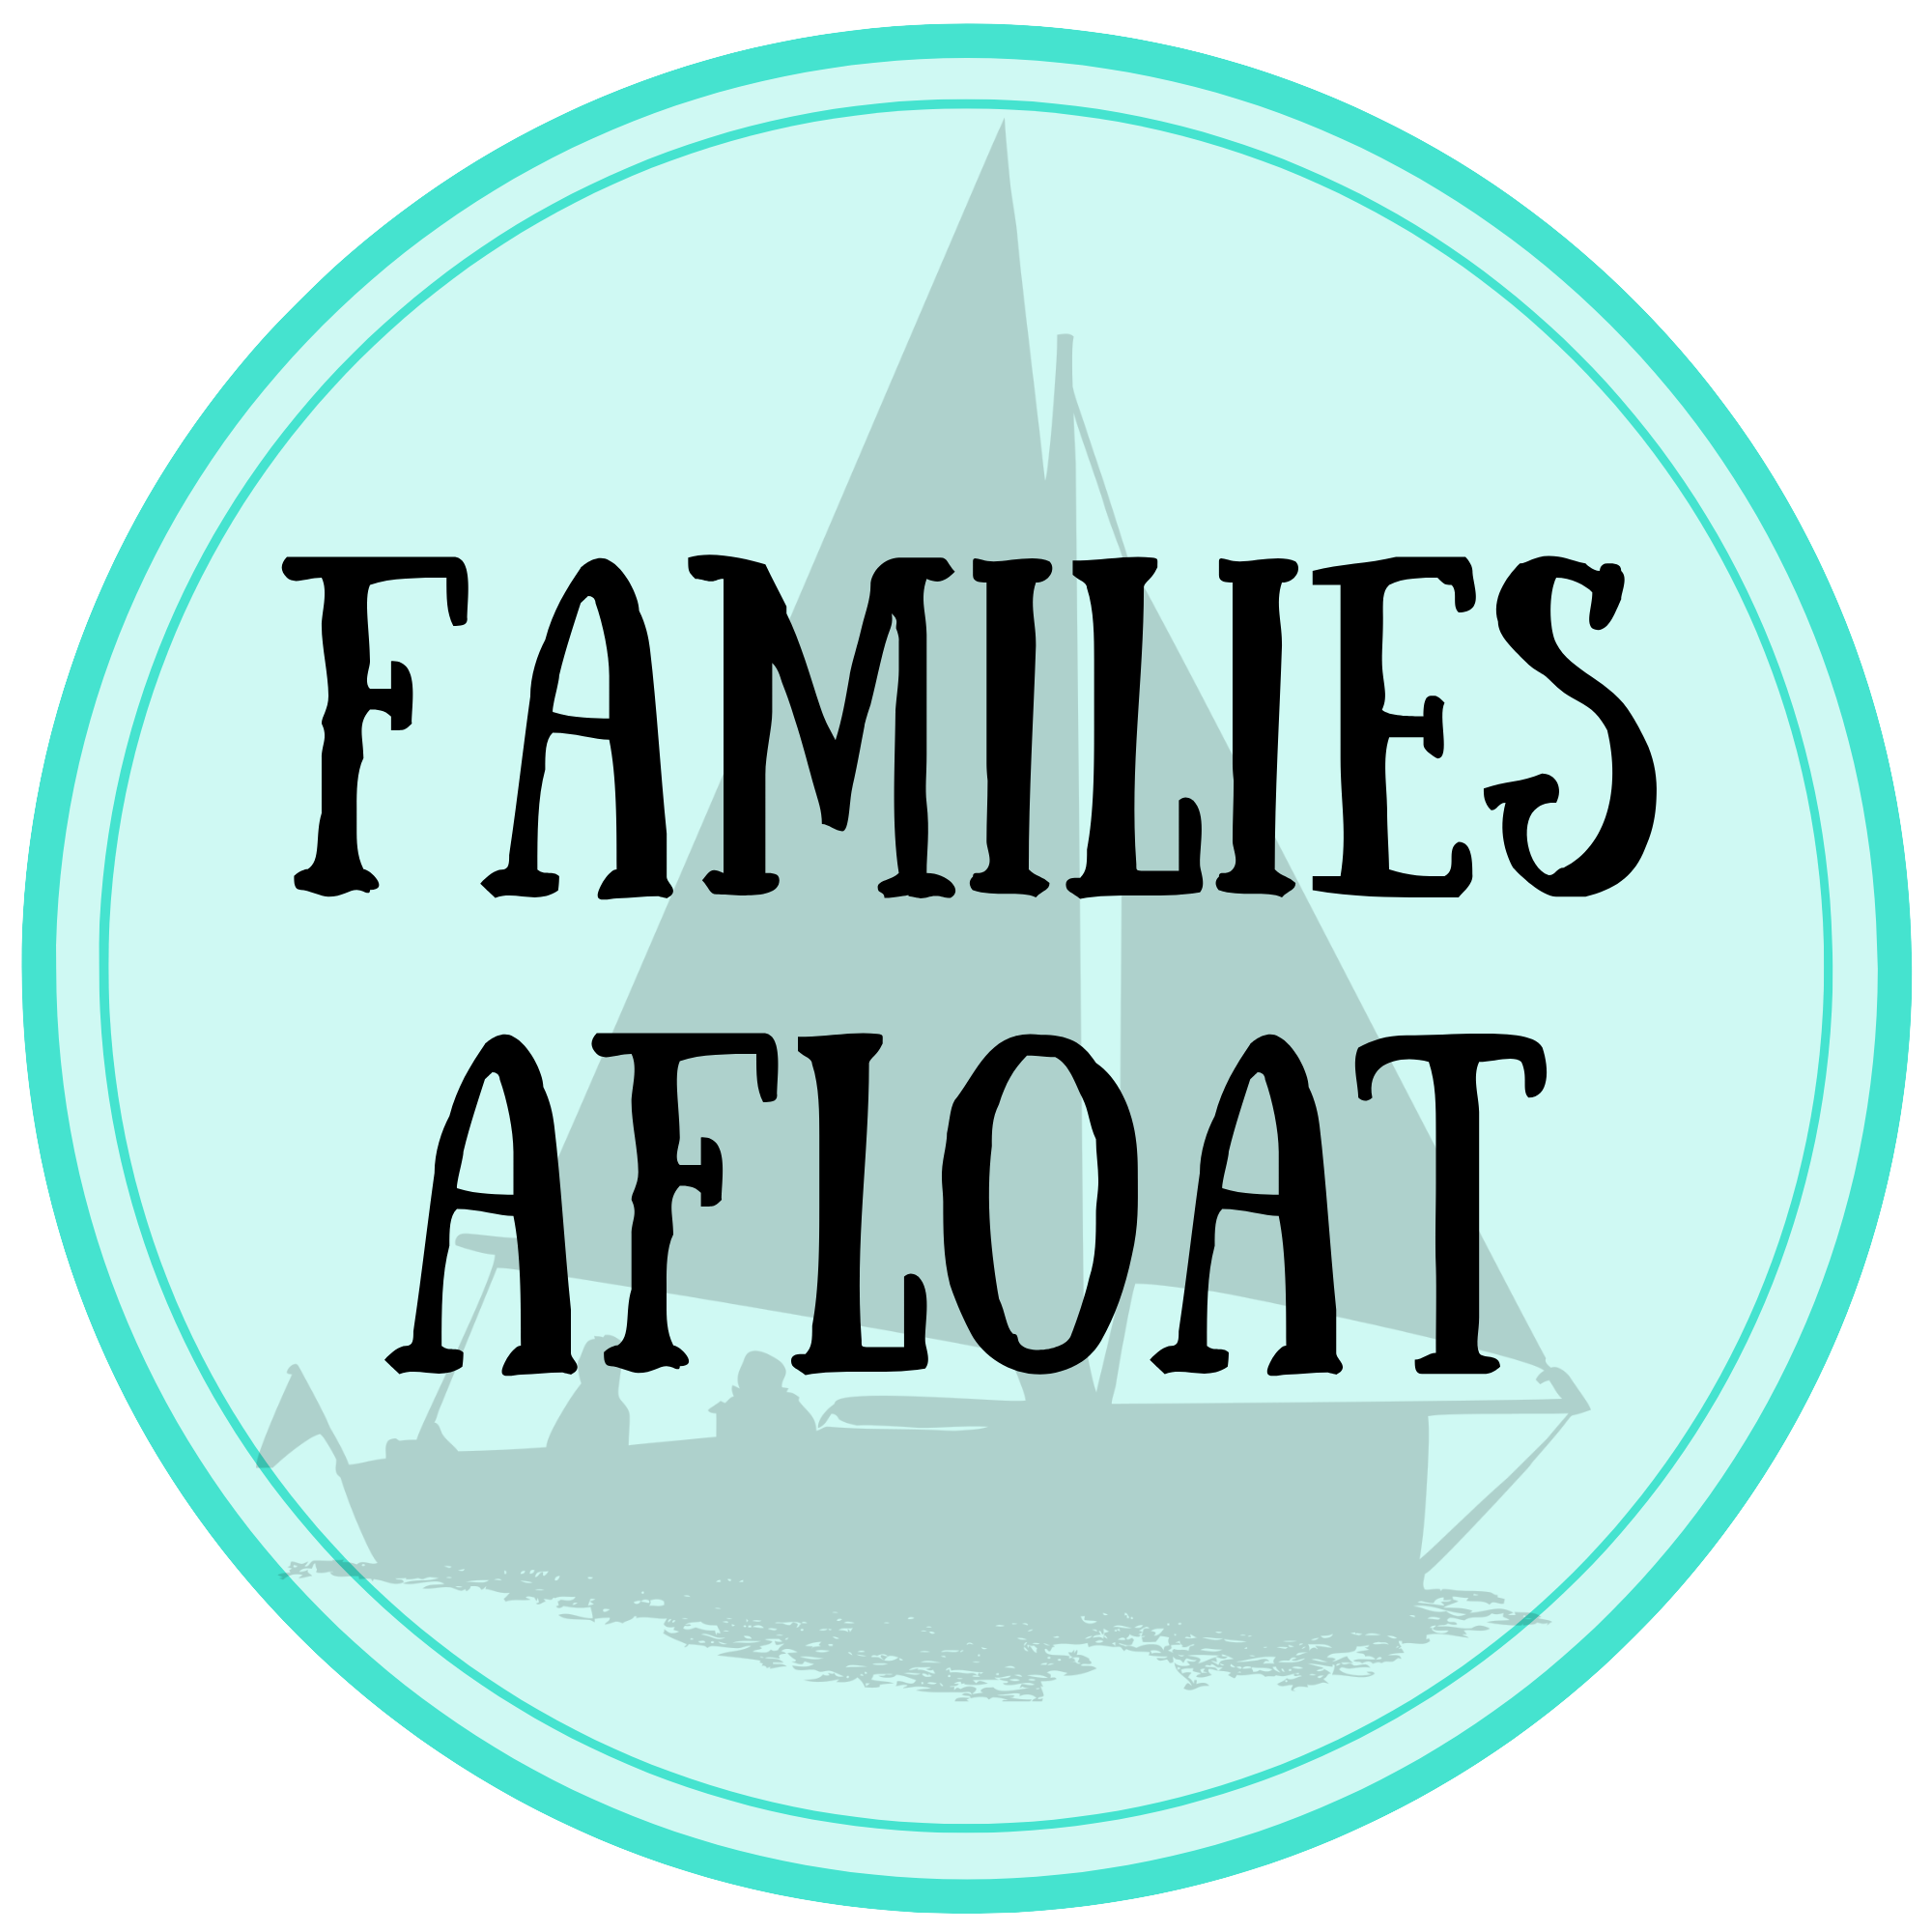 A small family sailing boat with the words 'FAMILIES AFLOAT' overlaid.